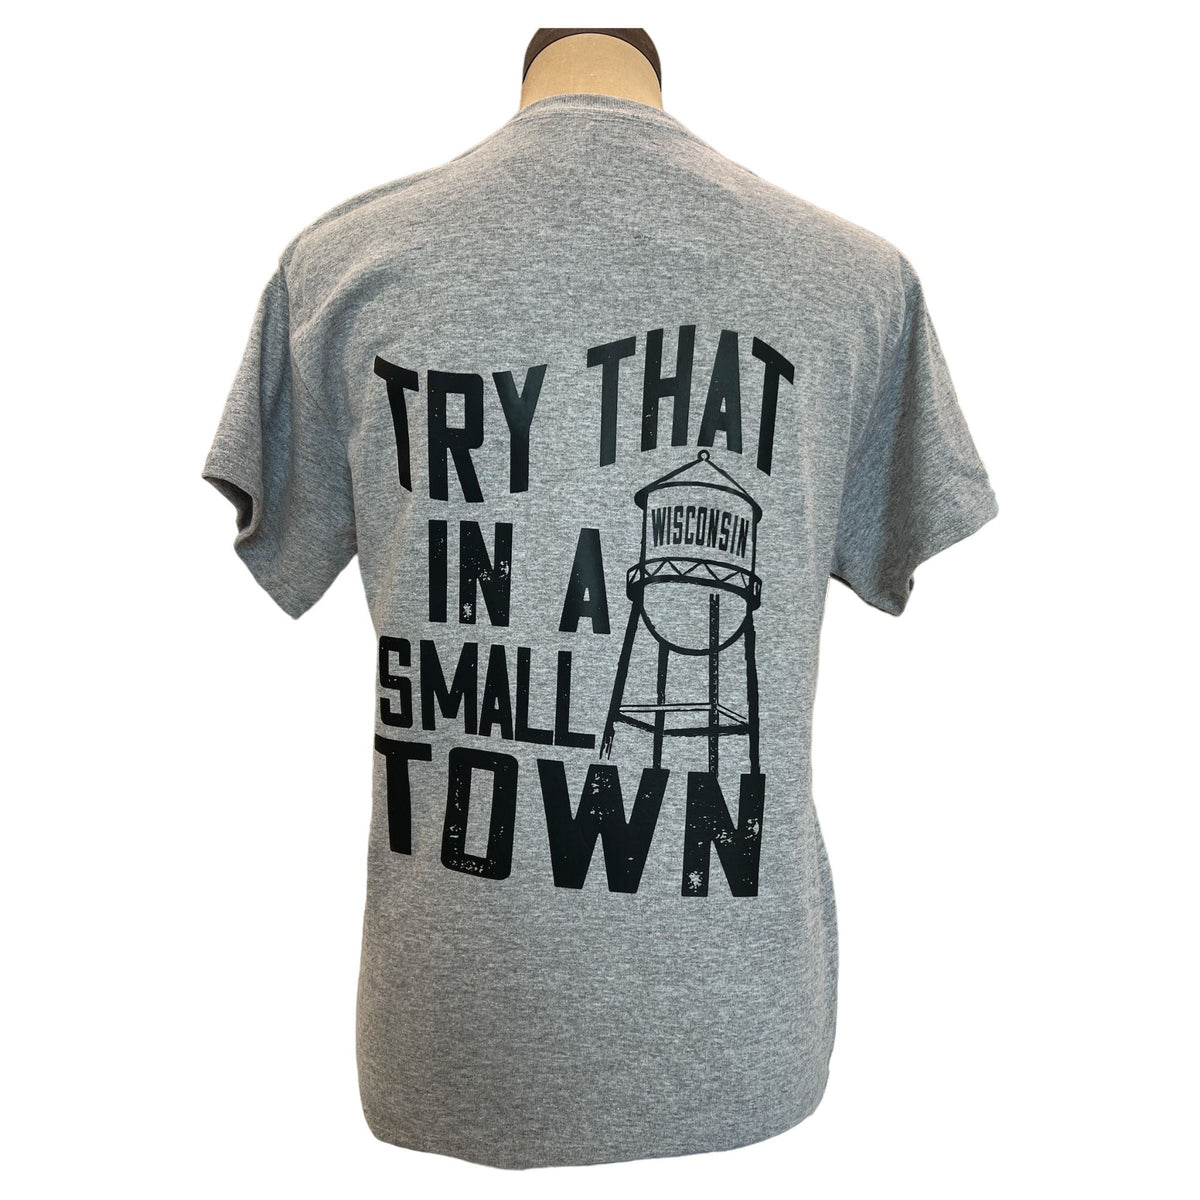 Try that in a small town- Tee